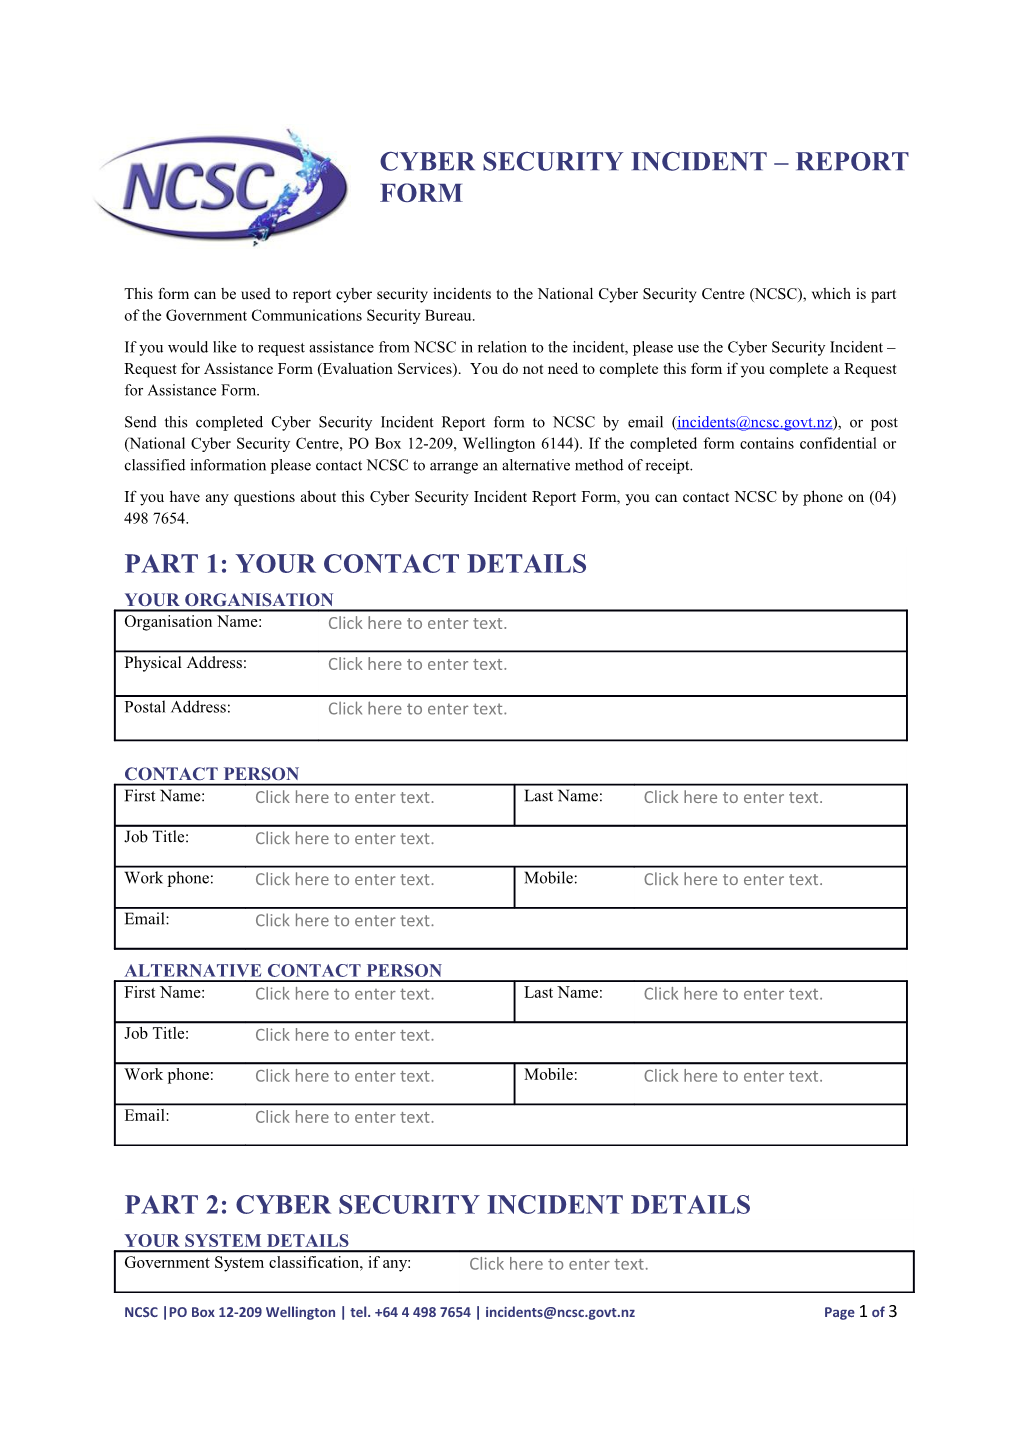 Cyber Security Incident REPORT FORM